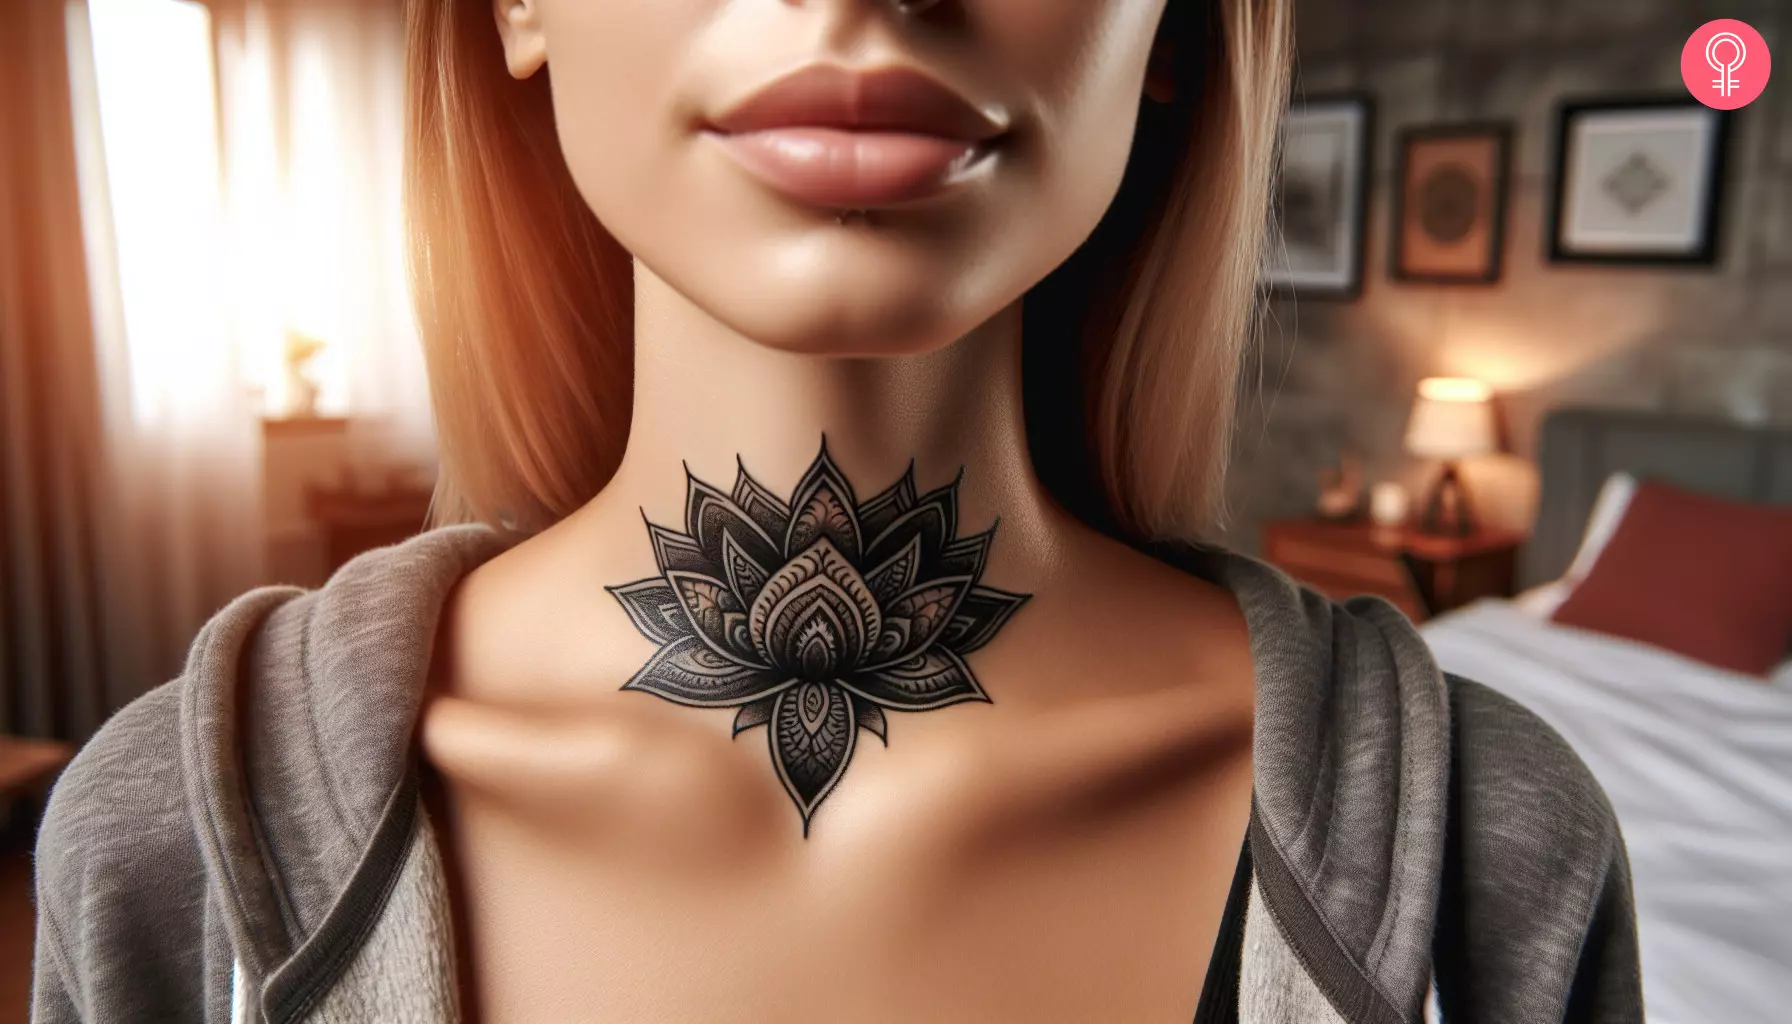 A woman with a classy throat tattoo